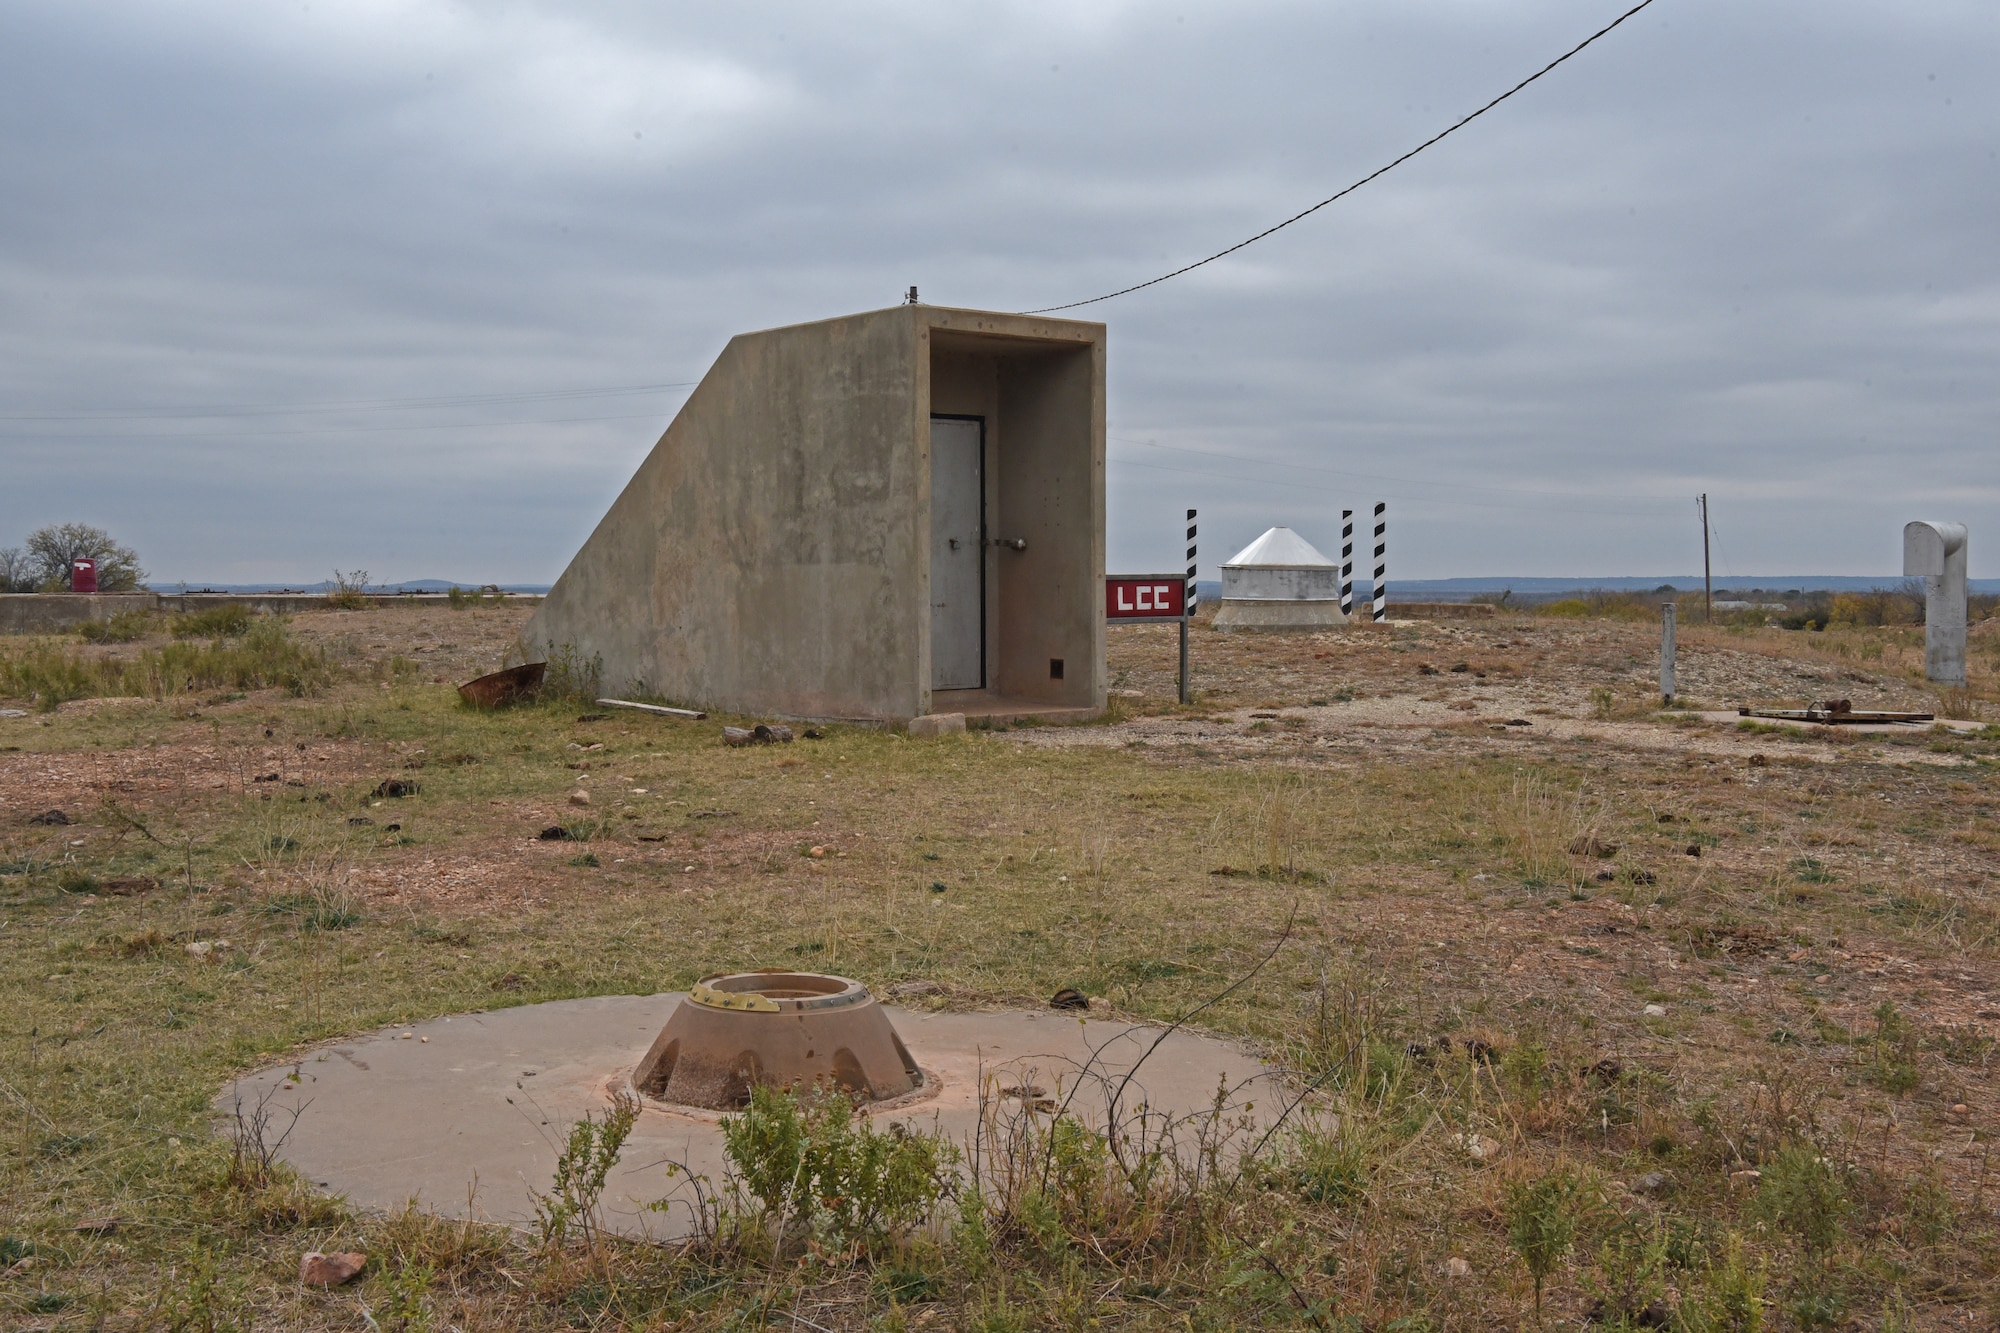 The above ground view at Lawn Atlas Missile Base’s missile silo in Lawn, Texas, Dec. 3, 2020. The silo was a storage and launching facility for the Atlas intercontinental ballistic missile F series during the Cold War in 1962. (U.S. Air Force photo by Senior Airman Abbey Rieves)